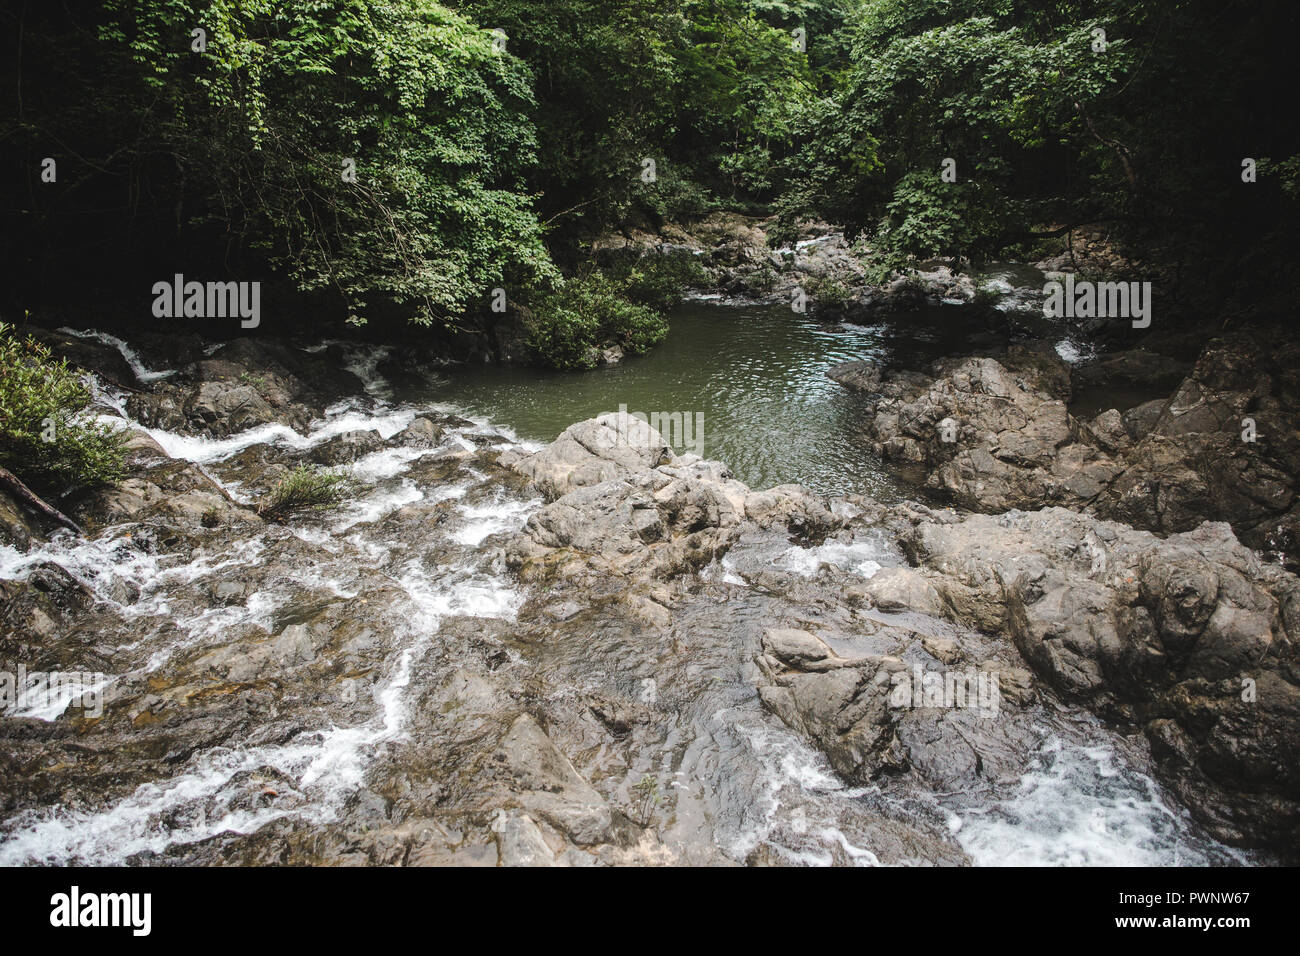 Rocky stream turns into waterfall that feeds a green natural pool in the forest of Montezuma, West coast Costa Rica Stock Photo